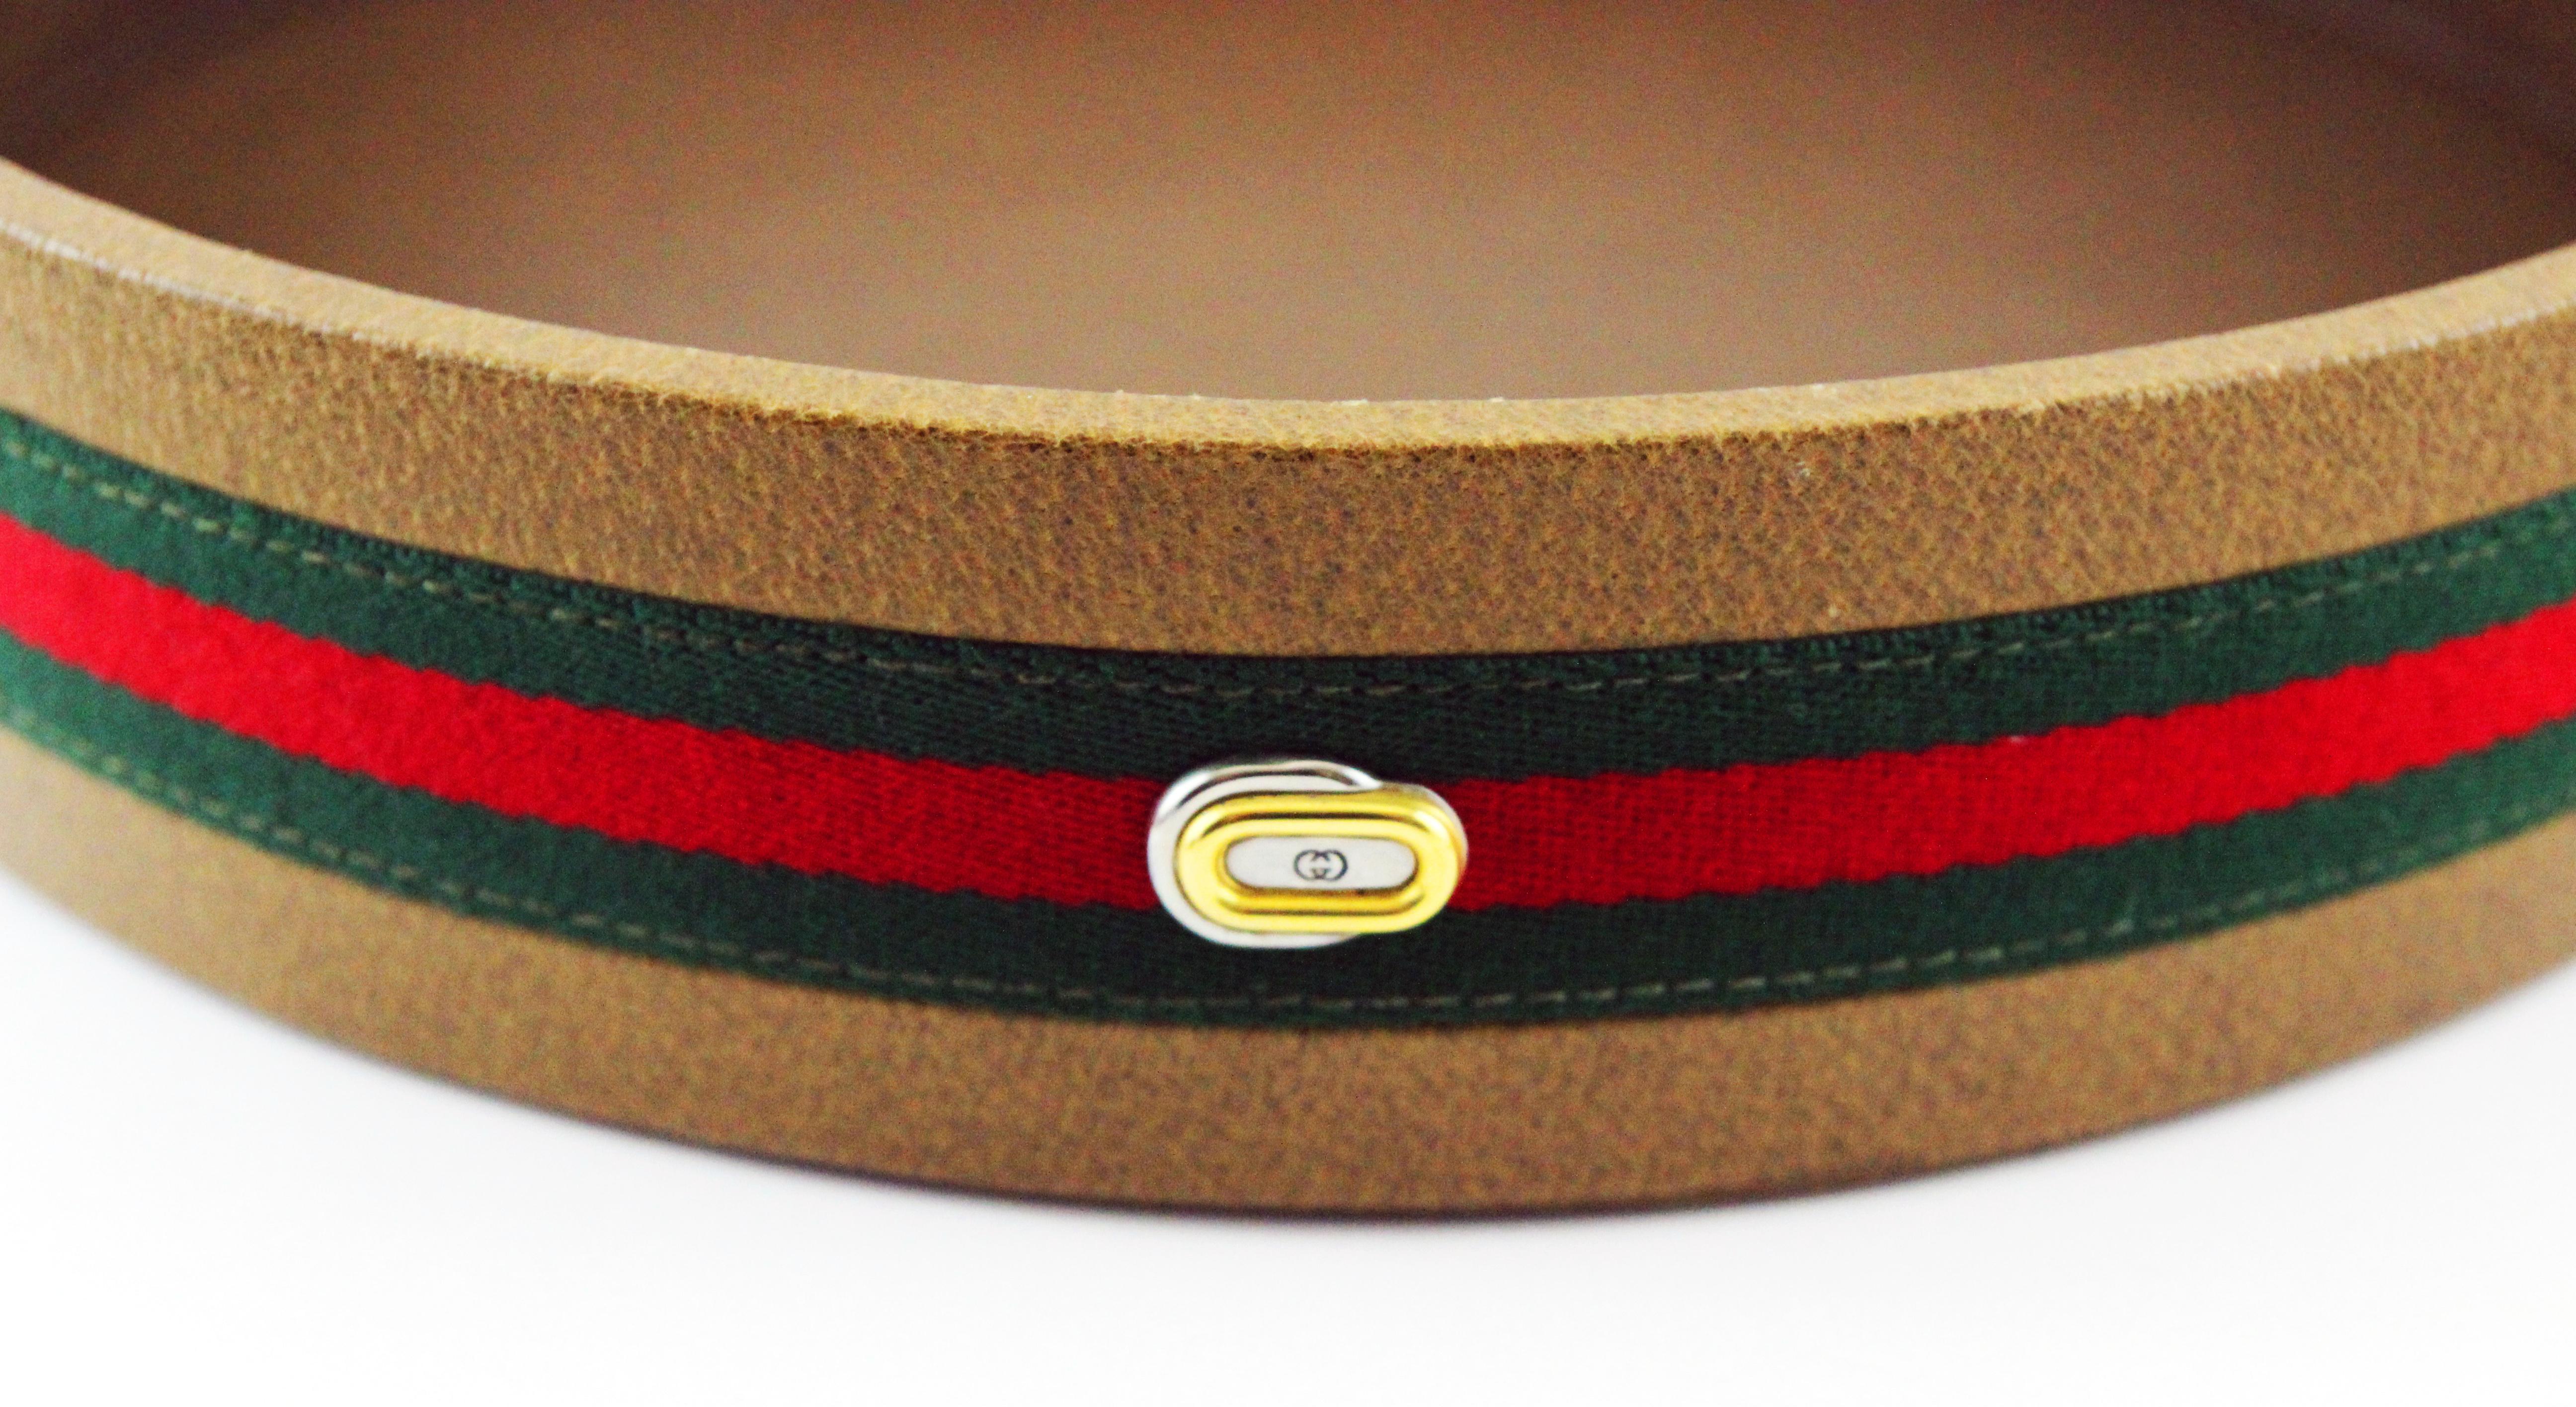 A lot of fun and exciting evening with this rare Gucci Poker Game of the 1970s
Made of leather, striped green and red fabric.

Marked: Gucci Made in Italy

Size: diameter 33 cm -13 in, high: 6 cm - 2.3 in

Excellent vintage condition.

